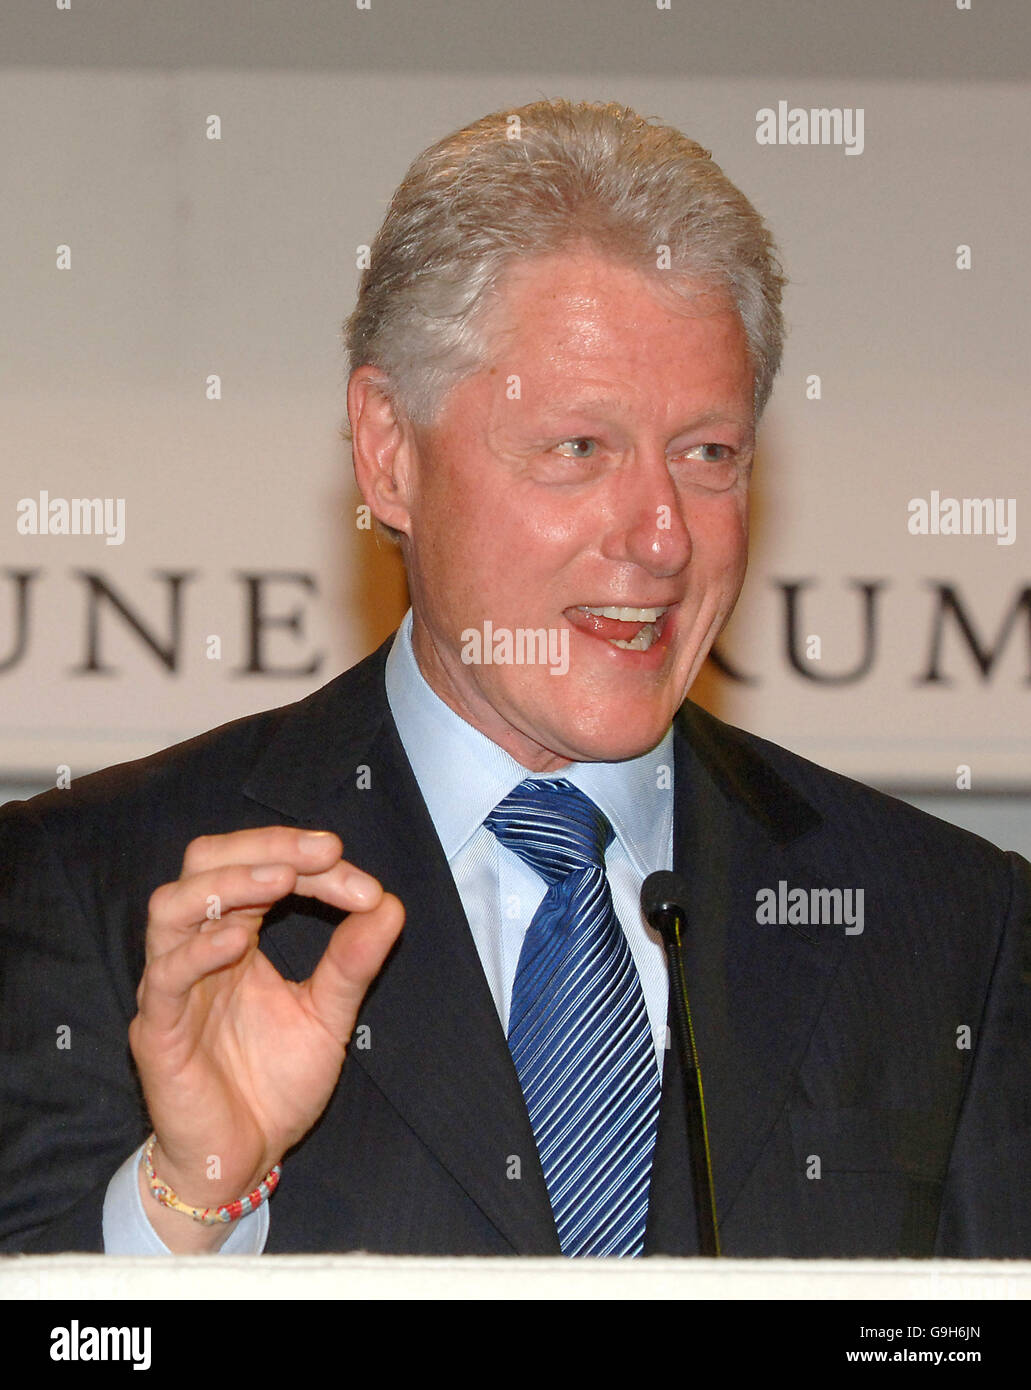 President Bill Clinton speaks at the Fortune Forum Summit in Old Billingsgate Market, central London. Picture date: Tuesday 26 September 2006. Photo credit should read: Ian West/PA Stock Photo